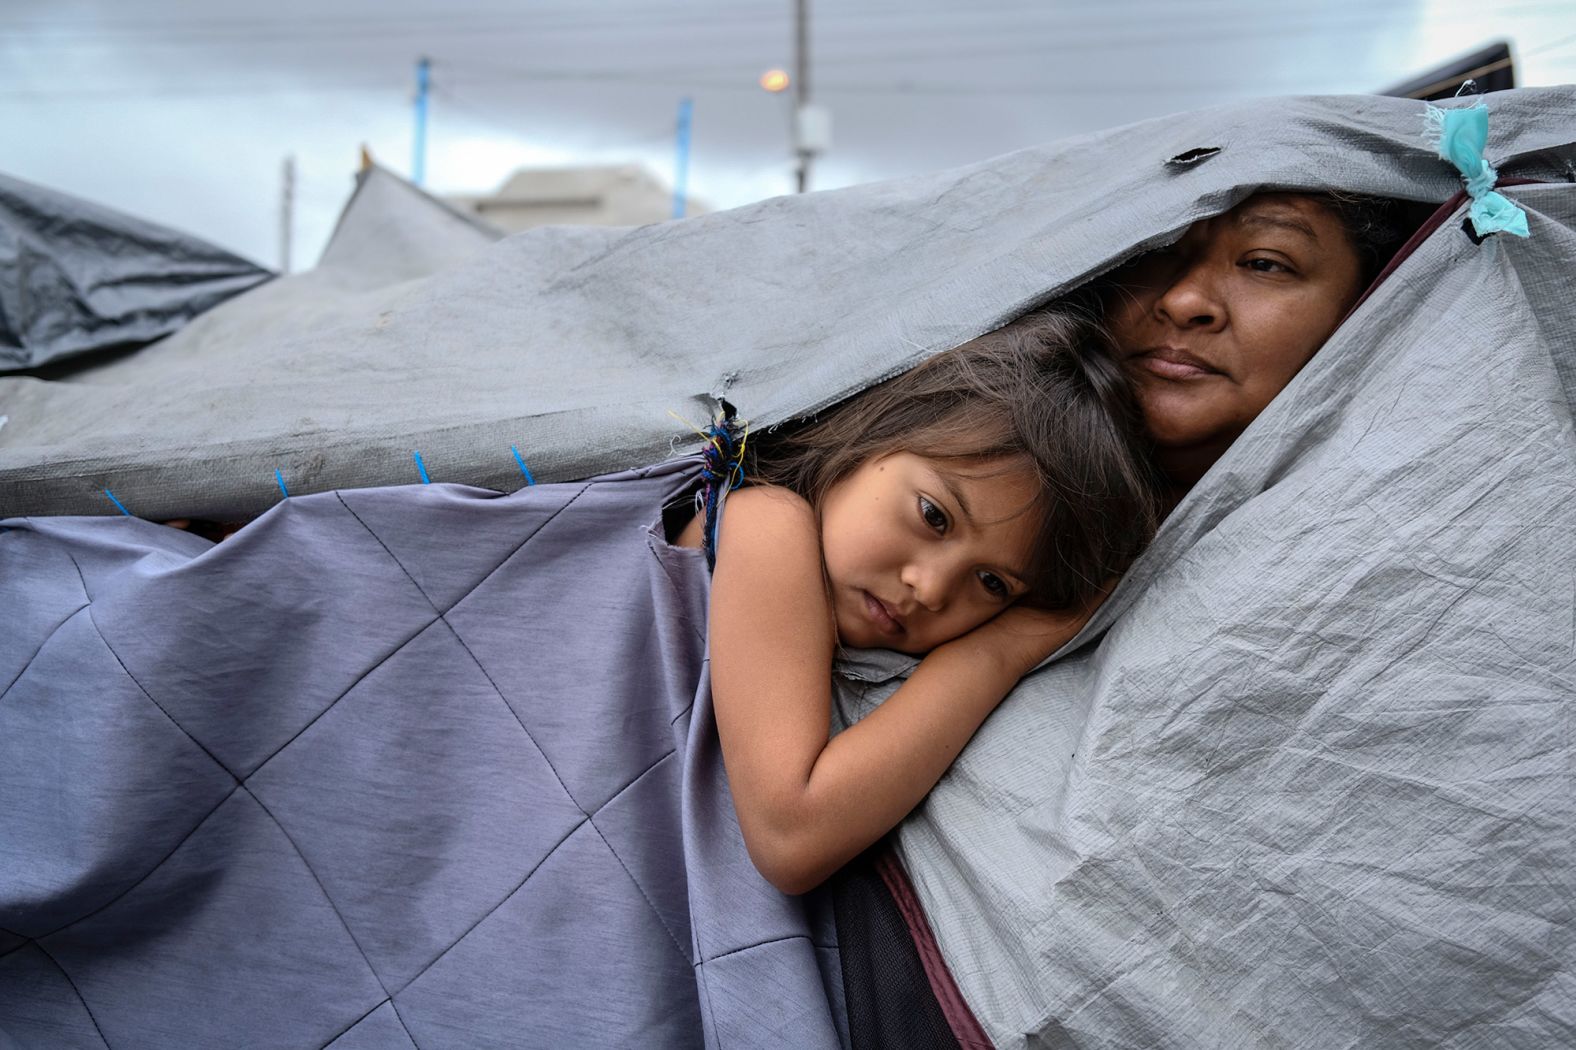 <strong>Toya Sarno Jordan, based in Mexico City, Mexico:</strong> Kami, 5, and her aunt Mariana, from Honduras, are listening to a discussion about hygiene norms at a makeshift migrant camp at the El Chaparral port of entry with the US in Tijuana, Mexico. The camp began to form after <a href="index.php?page=&url=https%3A%2F%2Fedition.cnn.com%2F2020%2F03%2F20%2Fpolitics%2Fus-mexico-border%2Findex.html" target="_blank">the US closed its land borders in March 2020</a> due to Covid-19 and has hosted up to around 2000 people from Central and Latin America.<br /> <br />At the time I took the photo, the camp was open to the press and I was able to spend many hours walking around and talking to people, which gave me access to more intimate moments in their daily lives.<br /> <br />What stands out to me is the grace that is found in moments of pause and silence within greater contexts of conflict. I find that in all coverage where there might be explicit violence, uncertainty and insecurity, there is equally beauty and light that define us as a global community.